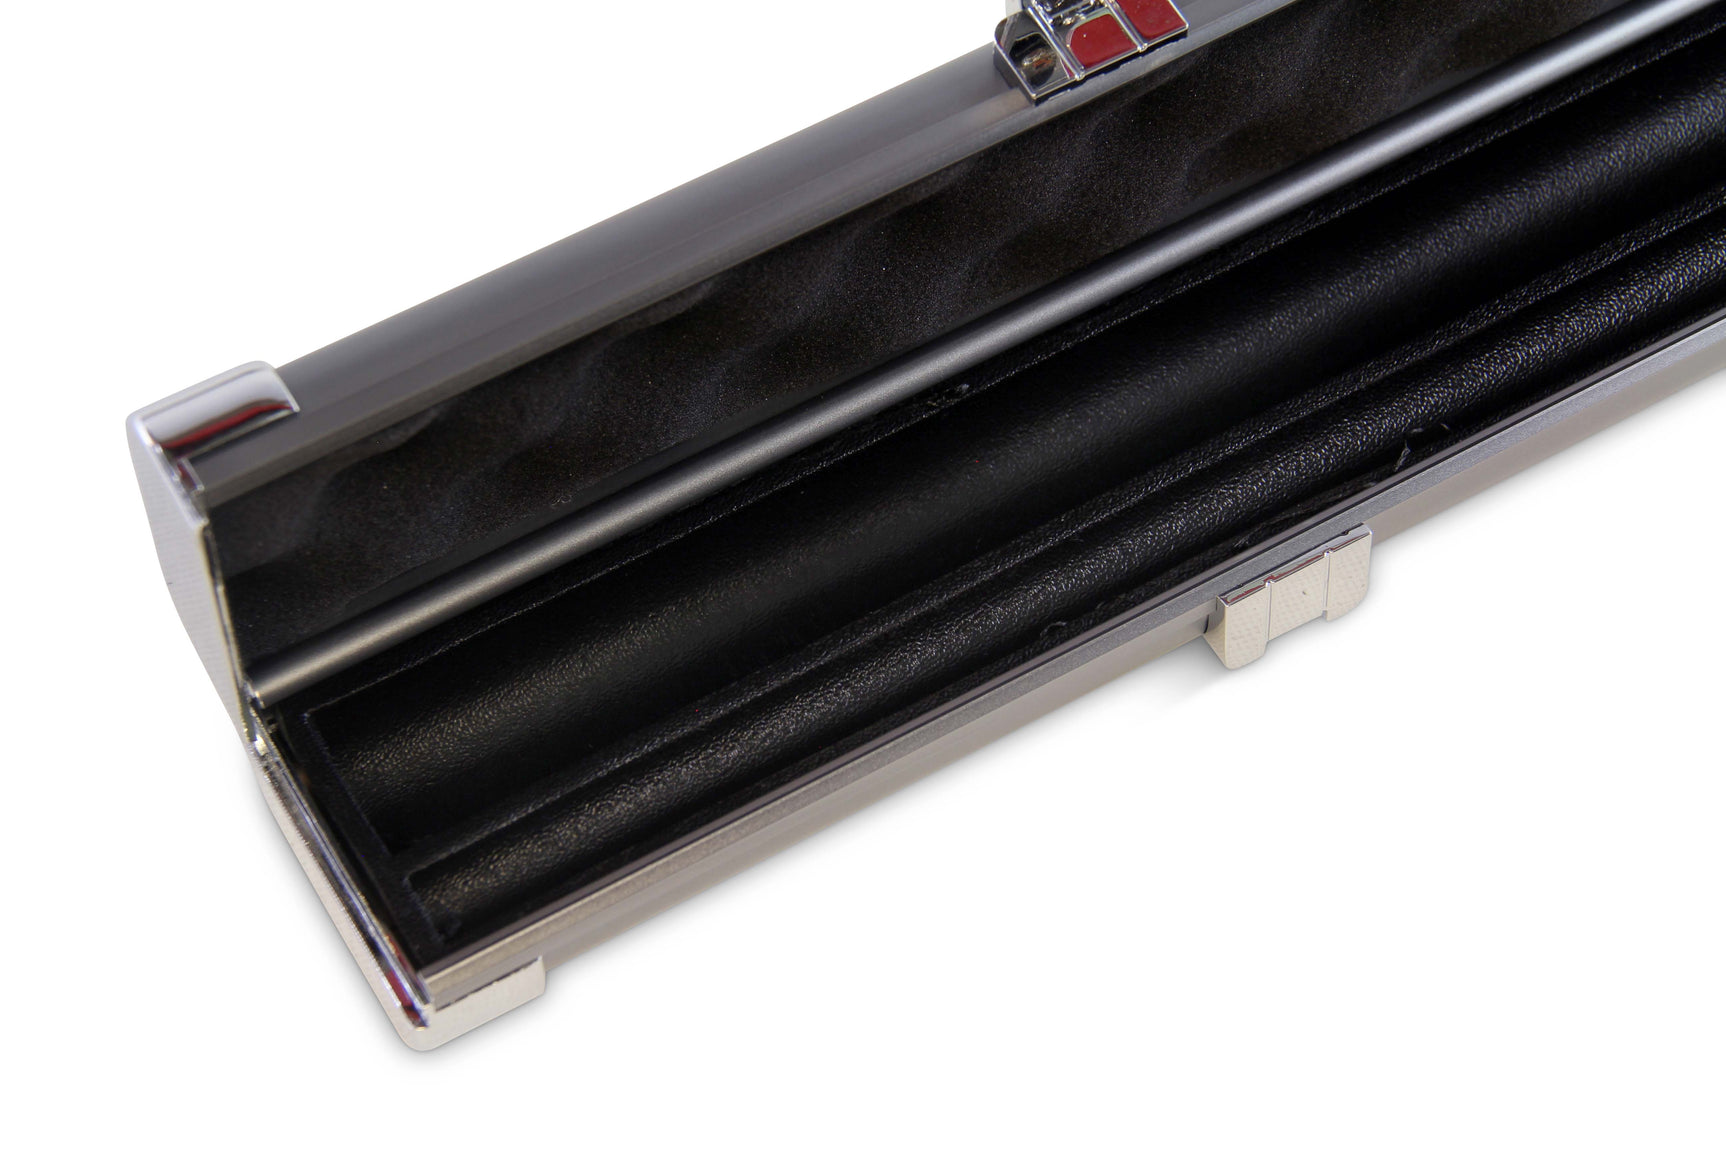 Baize Master PRESTIGE 1 Piece 2 Slot Metal Snooker Pool Cue Case - Holds 2 Cues